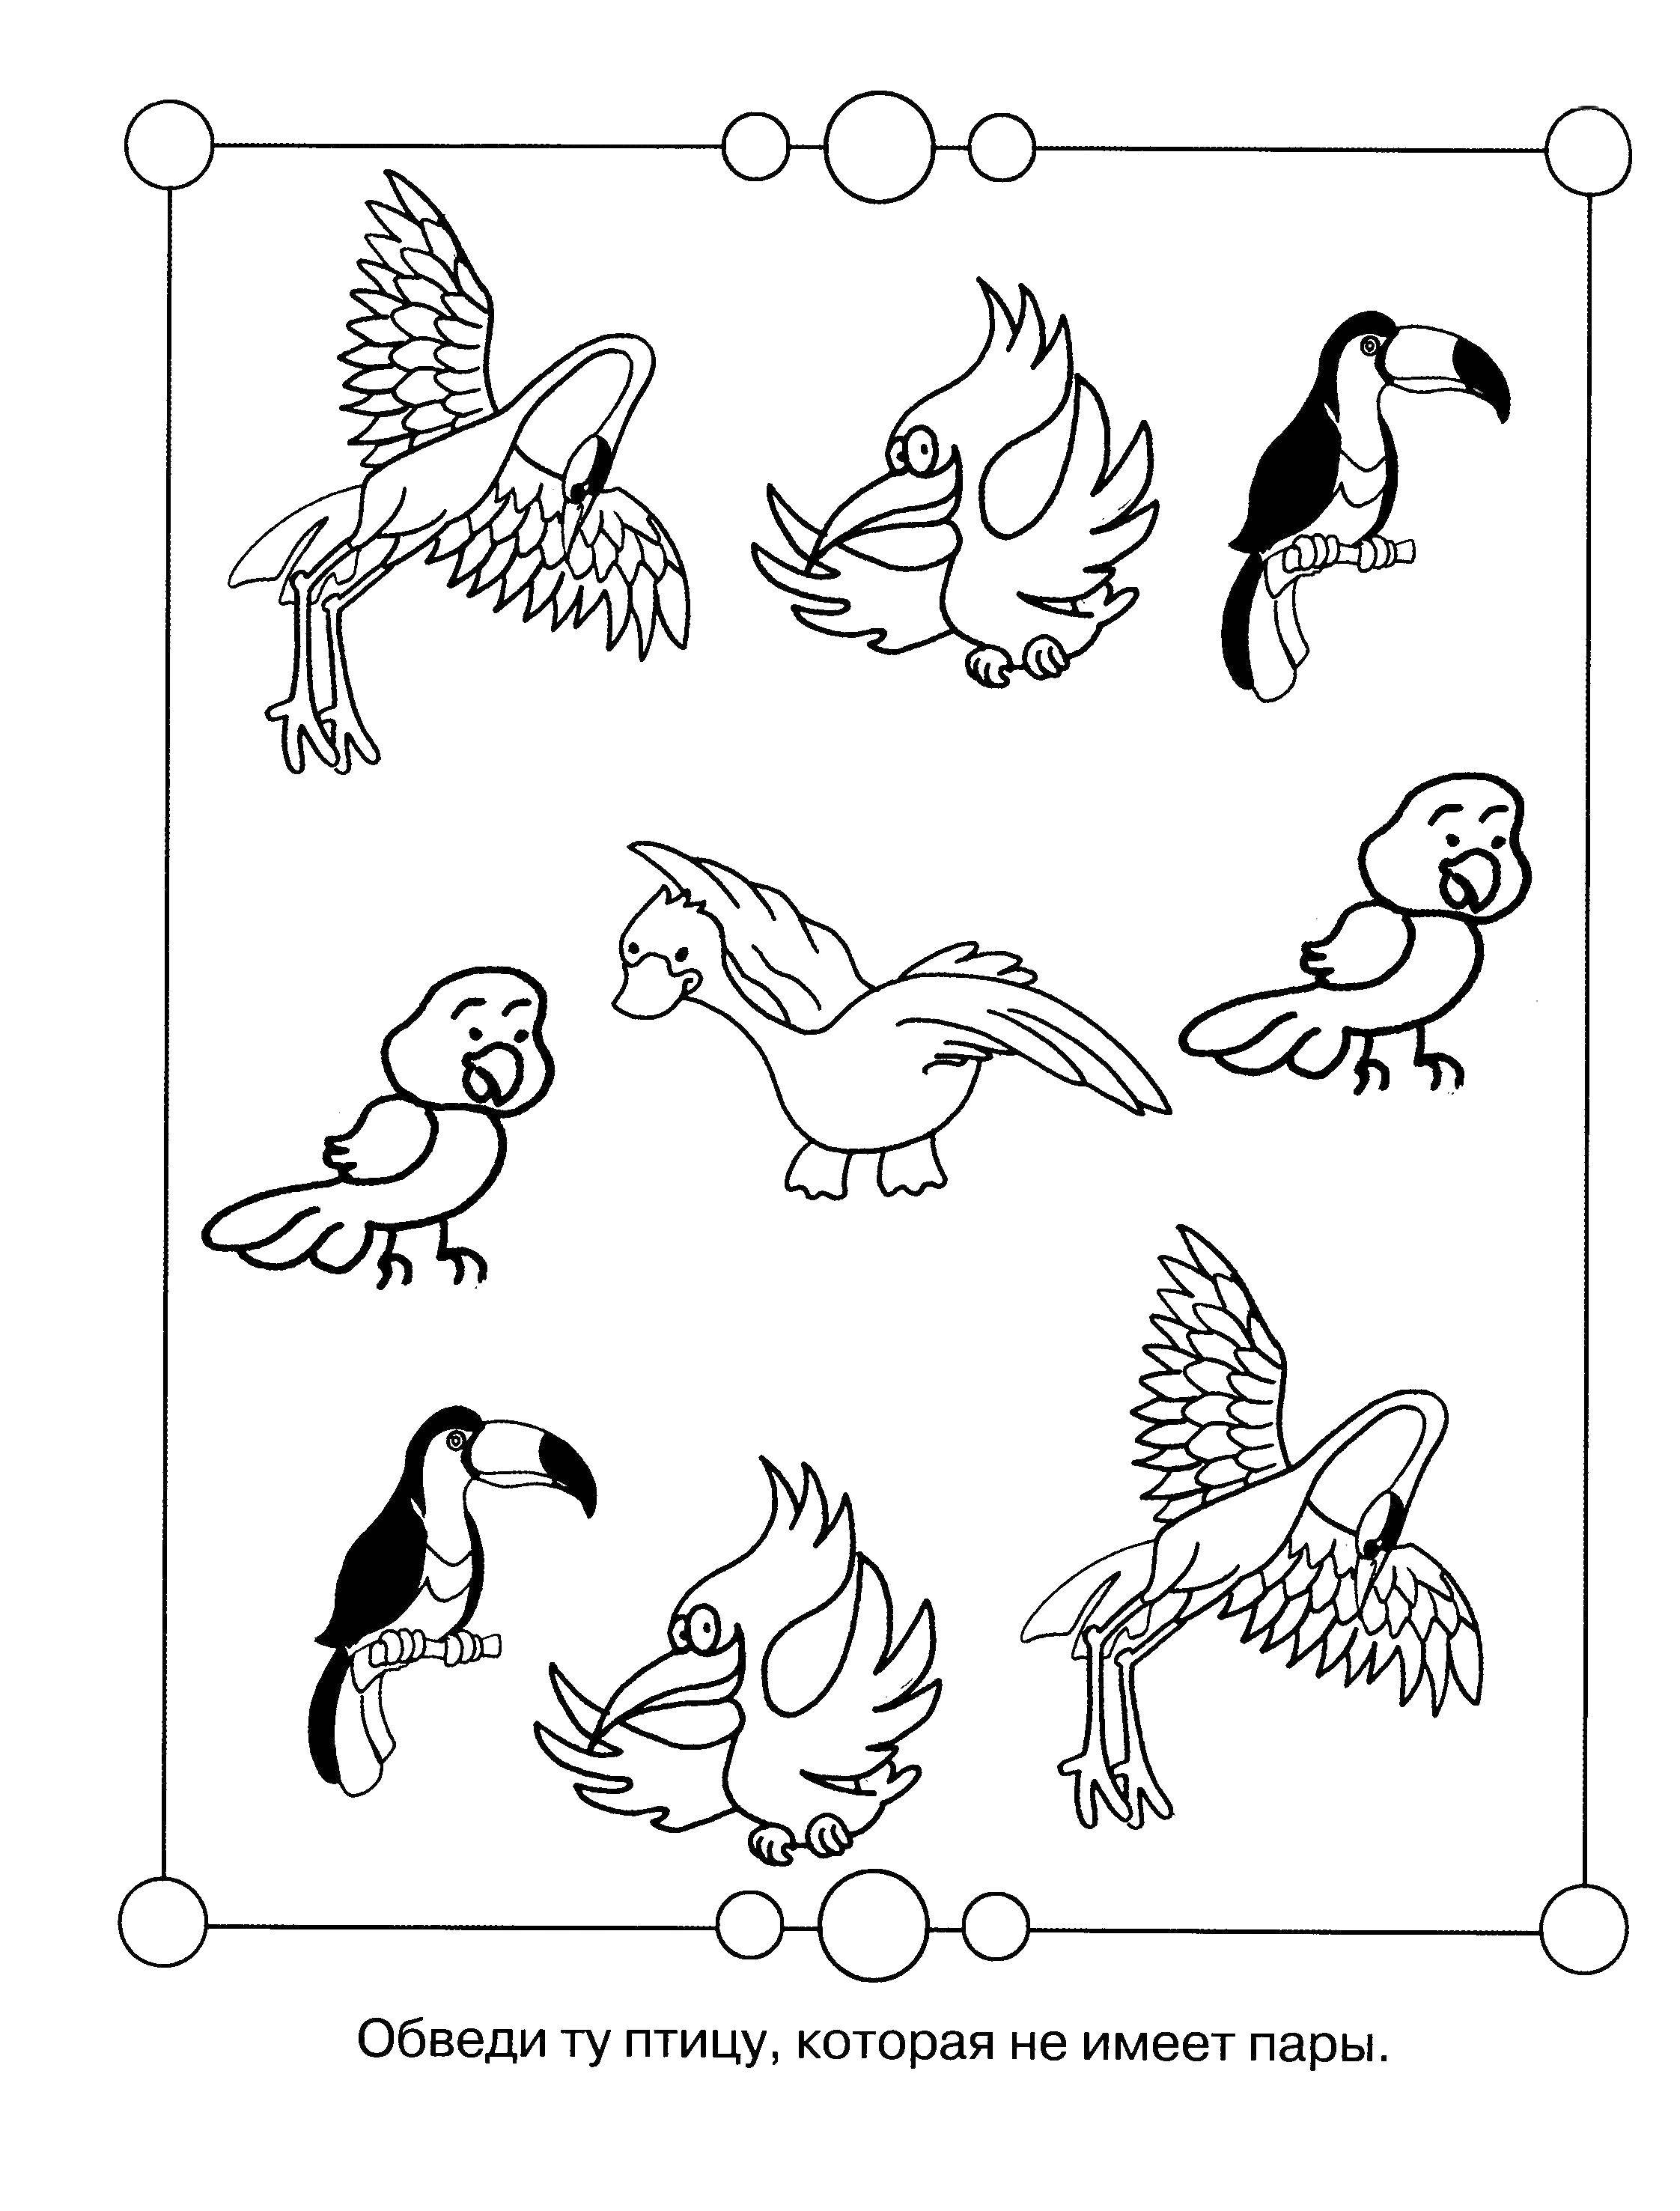 Coloring Circle the bird that has no pair. Category riddles for kids. Tags:  Teaching coloring, logic.